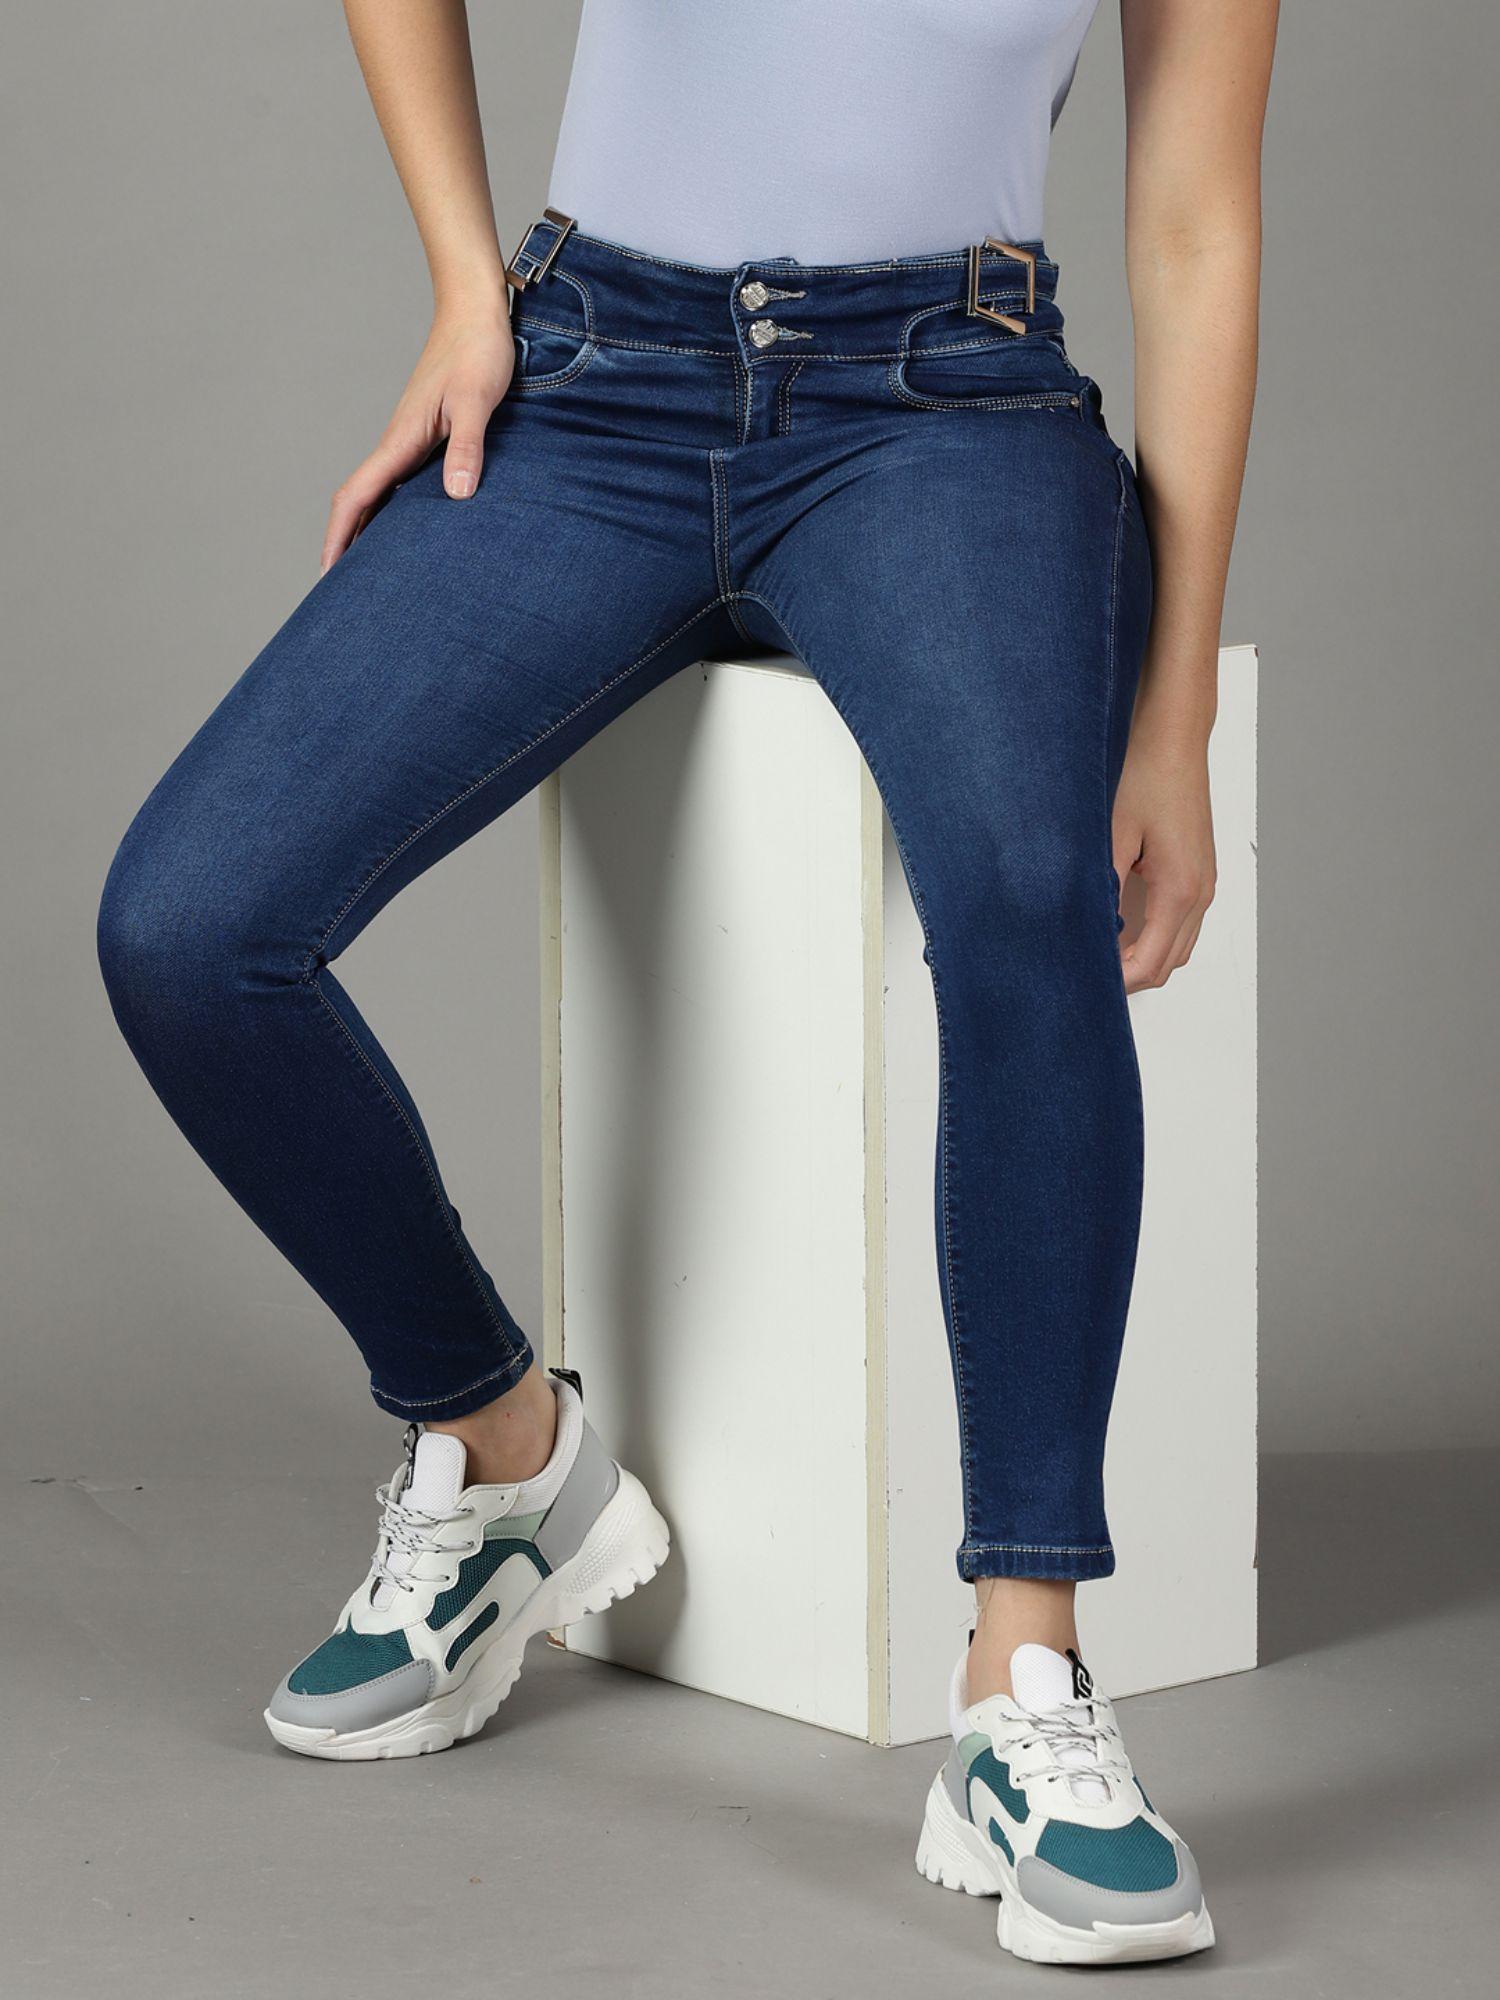 women's stretchable clean look navy blue slim fit jeans